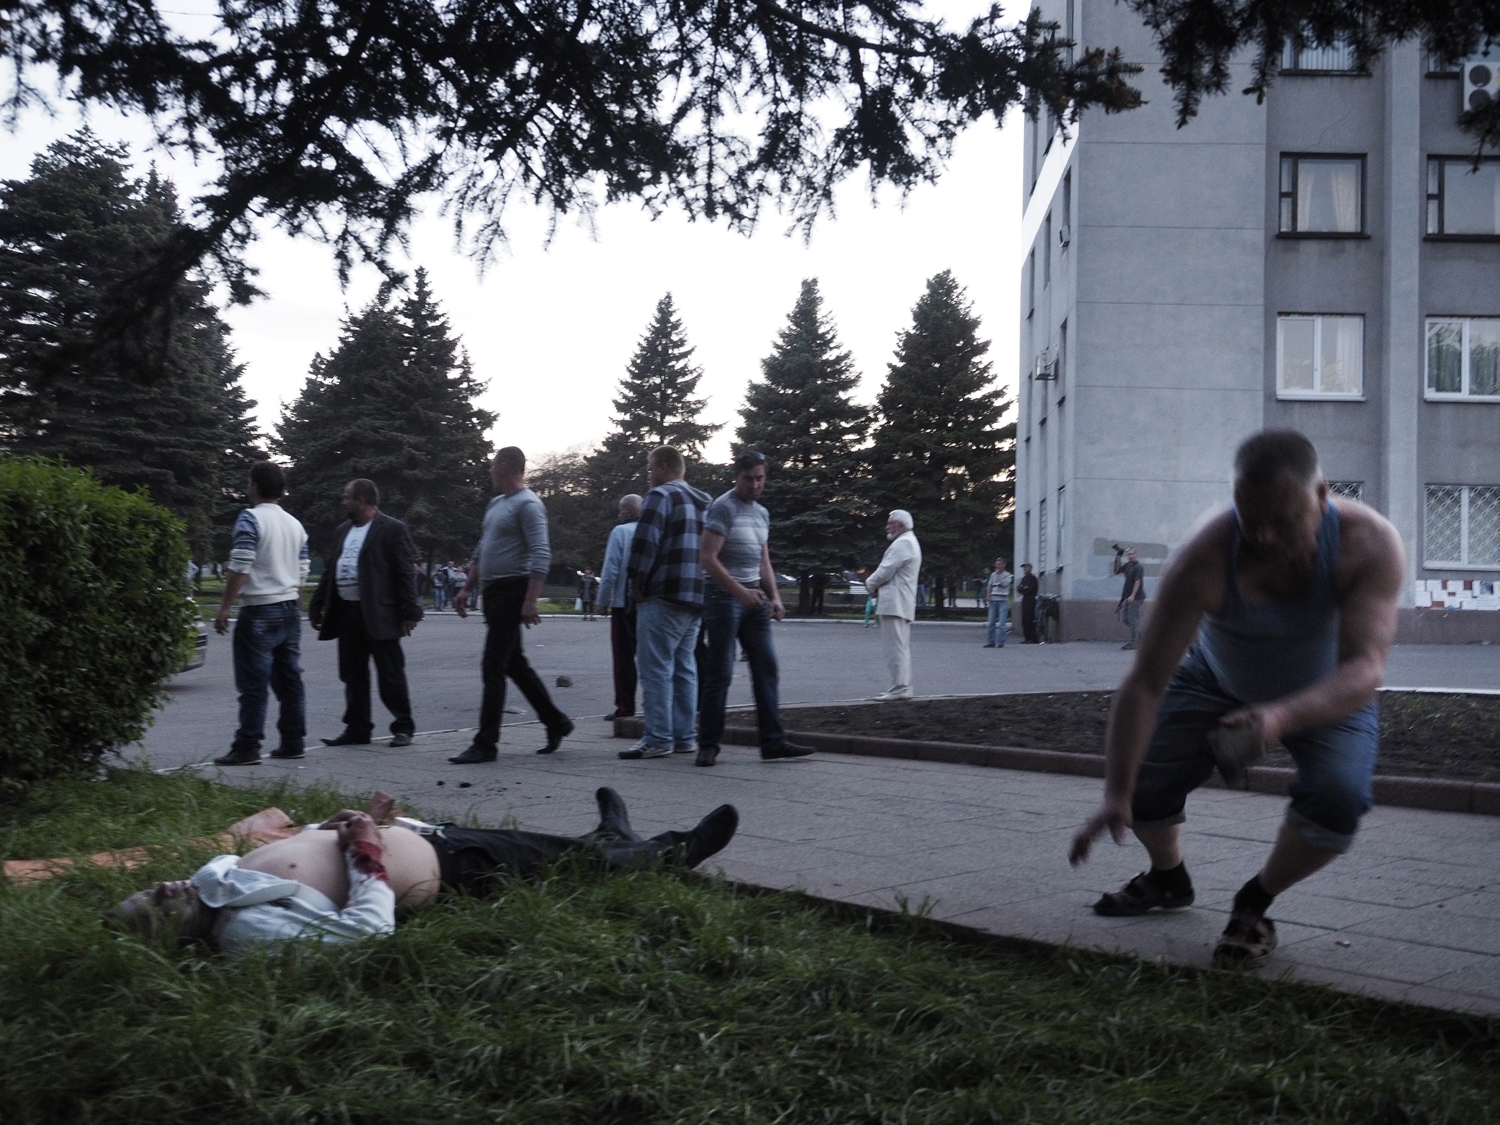 May 11, 2014. The man begins to collapse after being struck by a bullet.